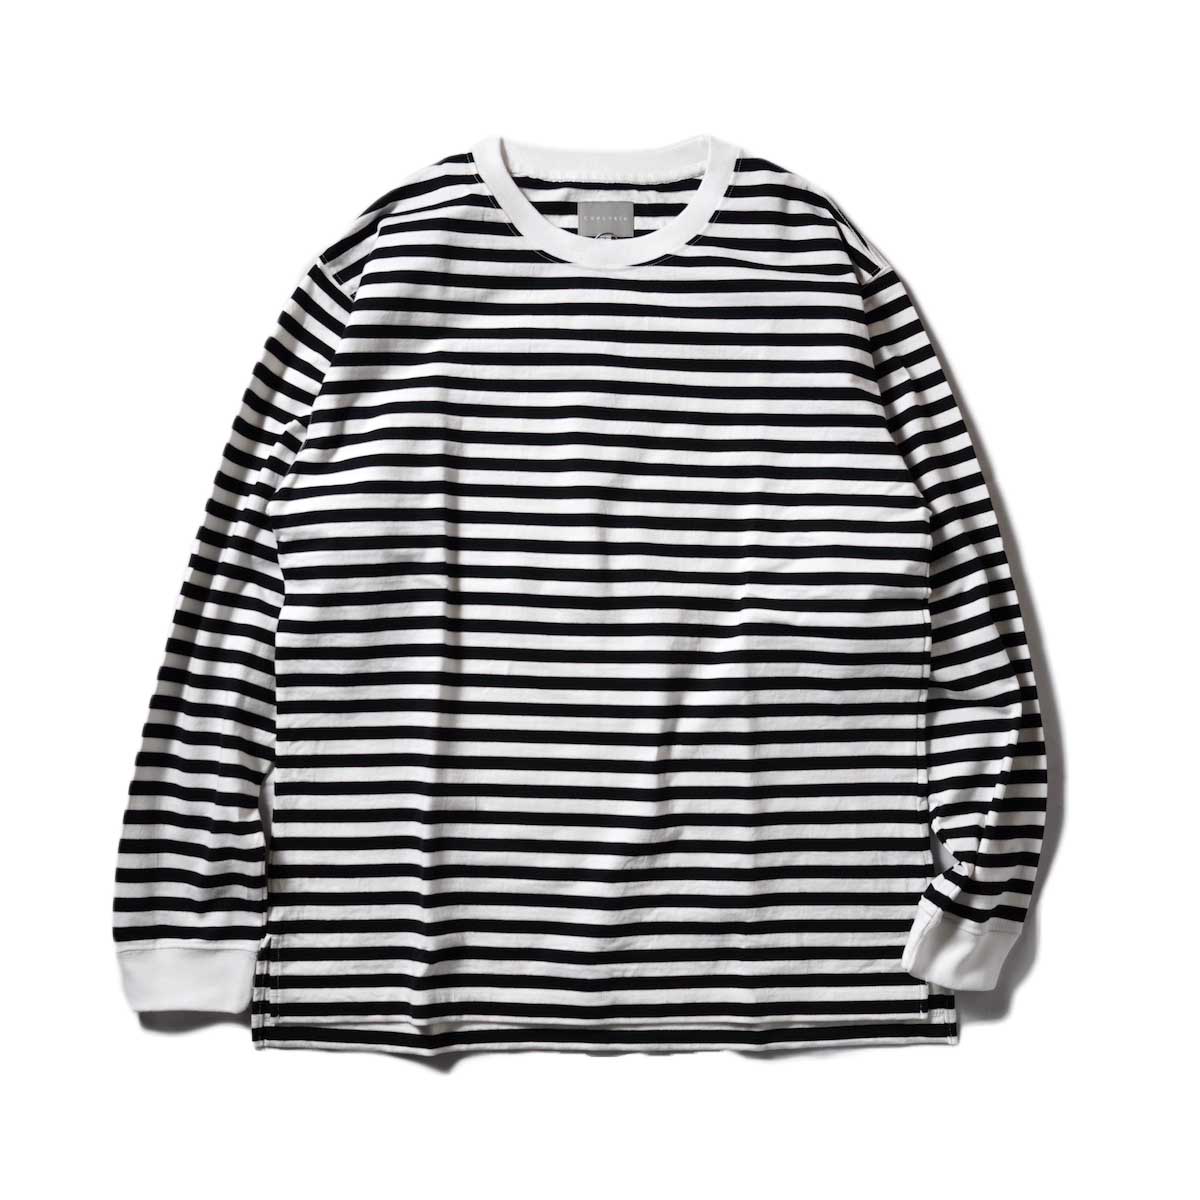 CURLY / RELAXIN L/S BORDER TEE (Black / White)